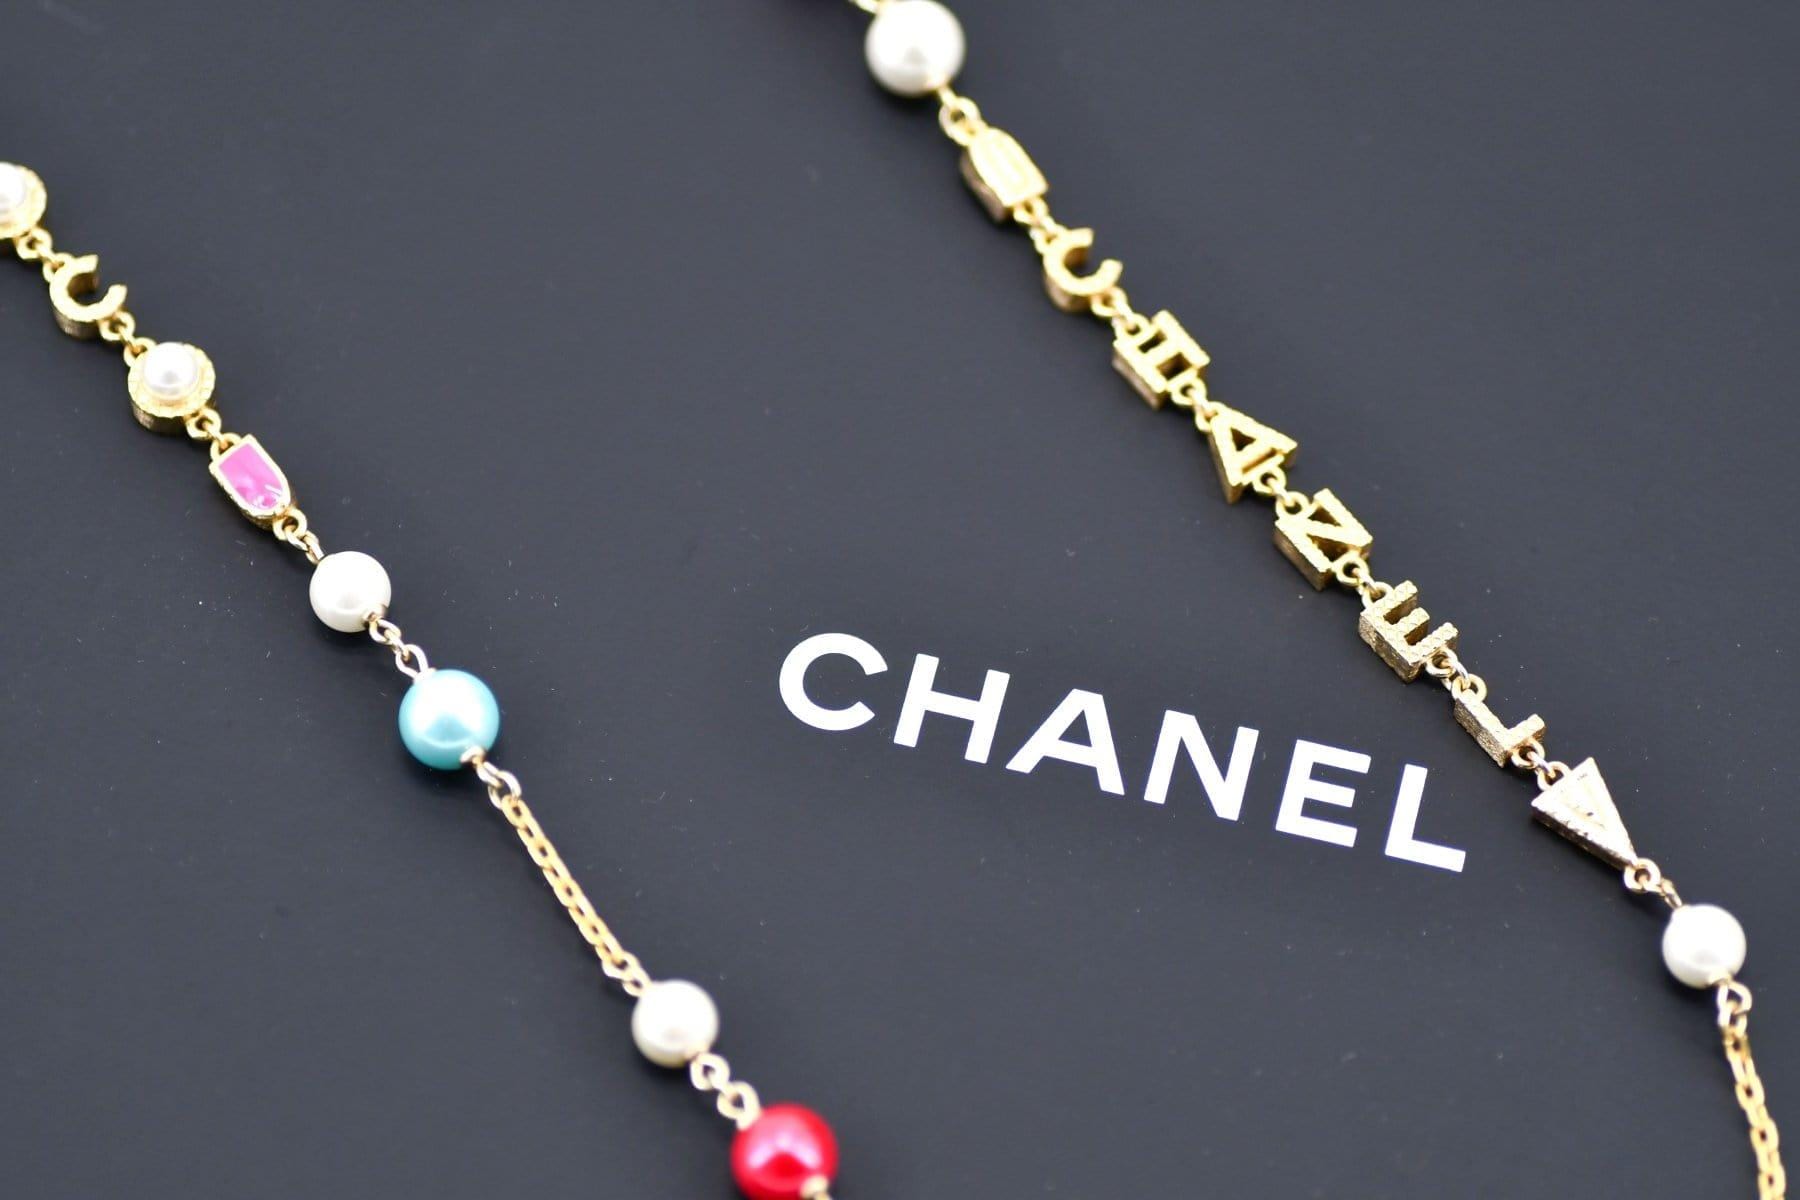 Chanel Chanel rainbow necklace